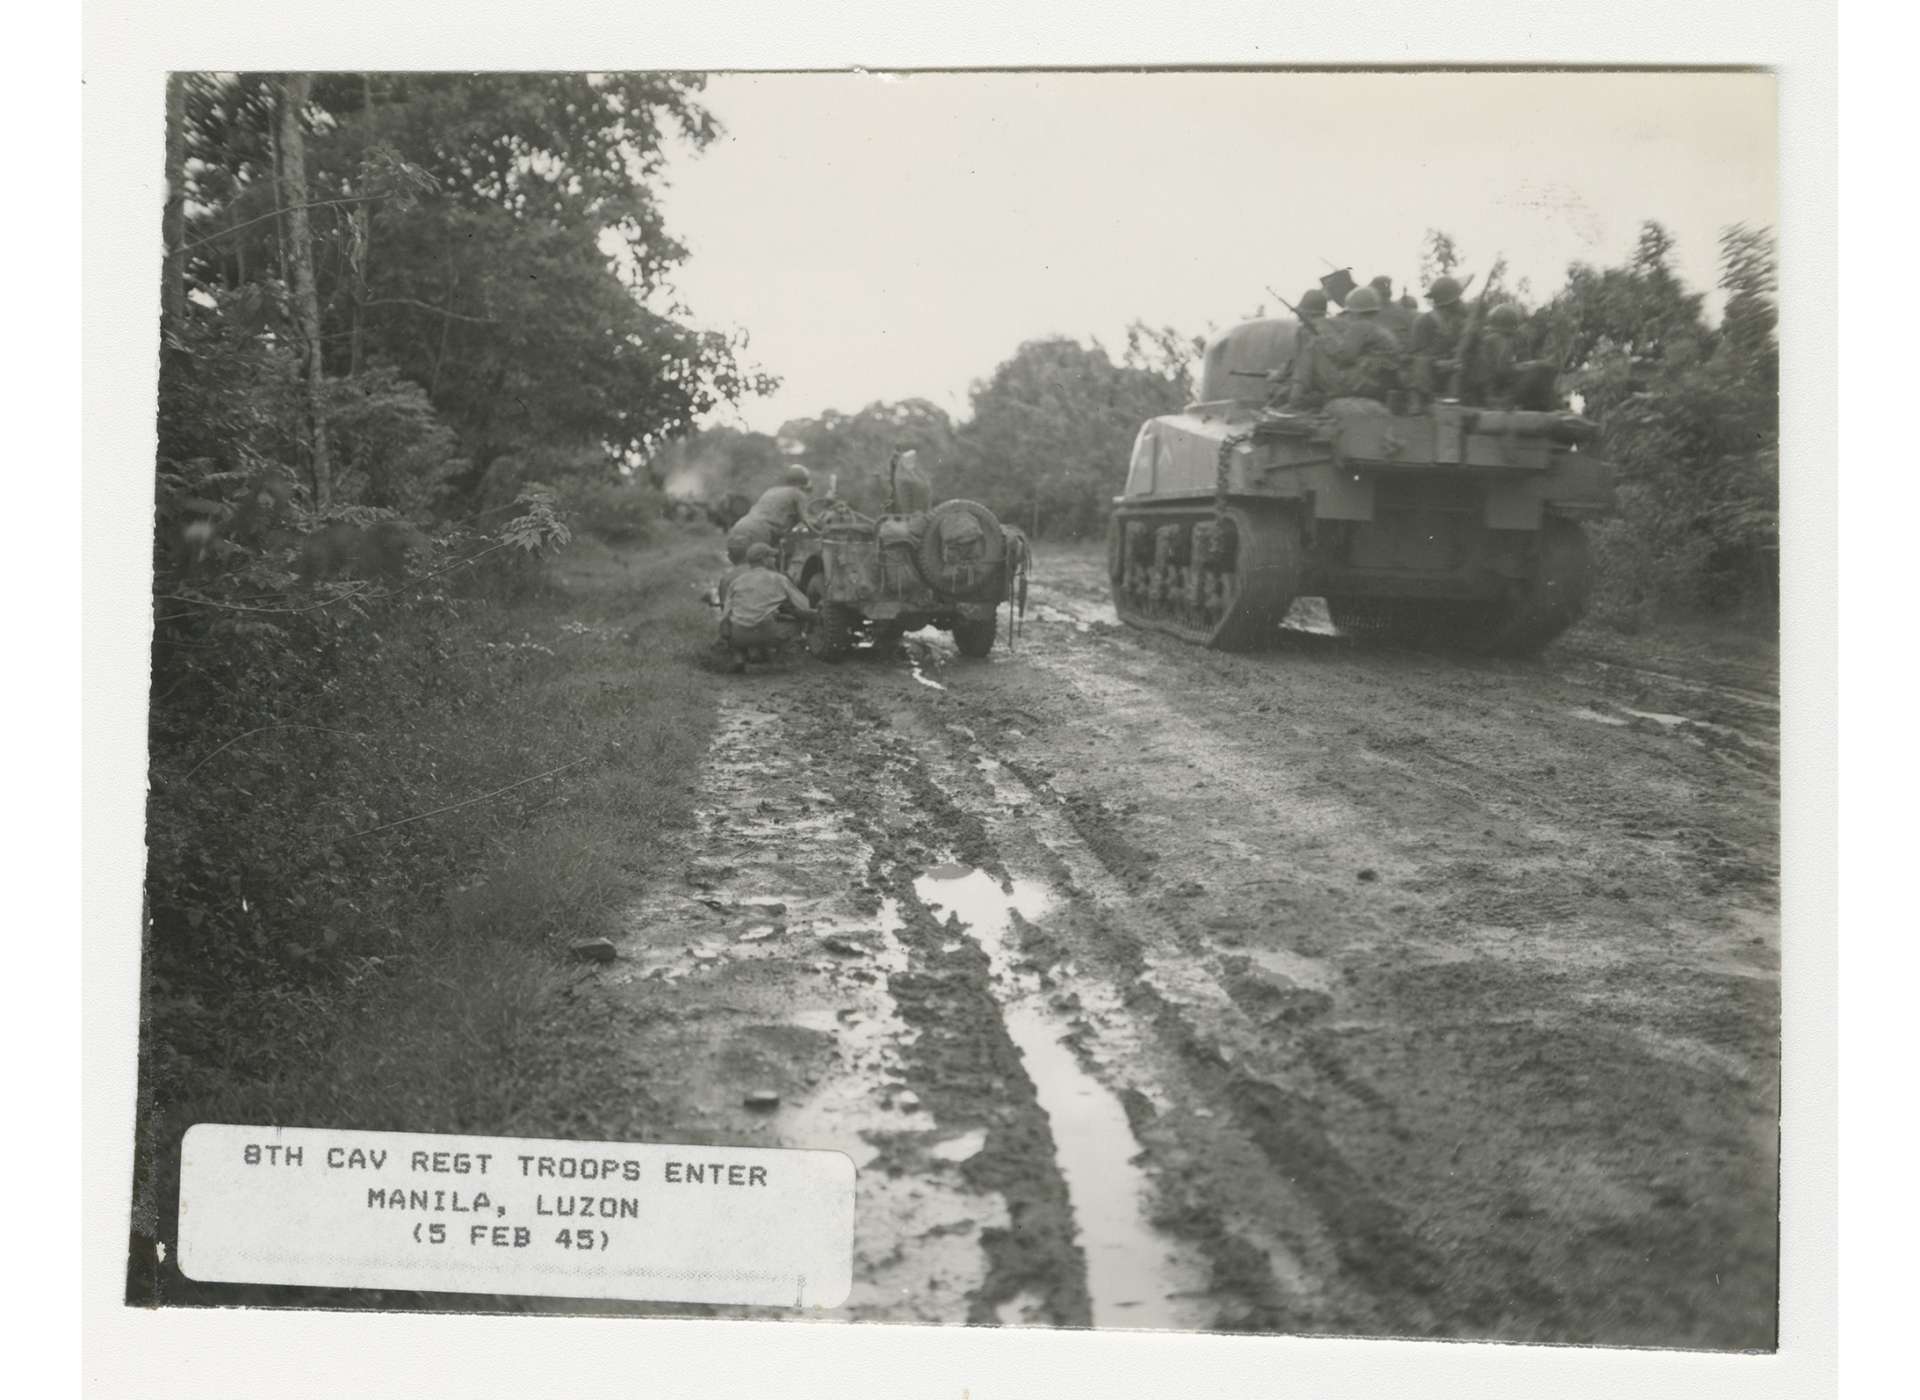 Troopers of the 8th Cavalry’s “flying column” supported by tanks raced to reach Manila on February 3, 1945 and free the internees at Santo Tomas University. US Army Signal Corps Photograph, Gift of Donald E. Mittelstaedt, from the Collection of The National World War II Museum, 2008.354.495.